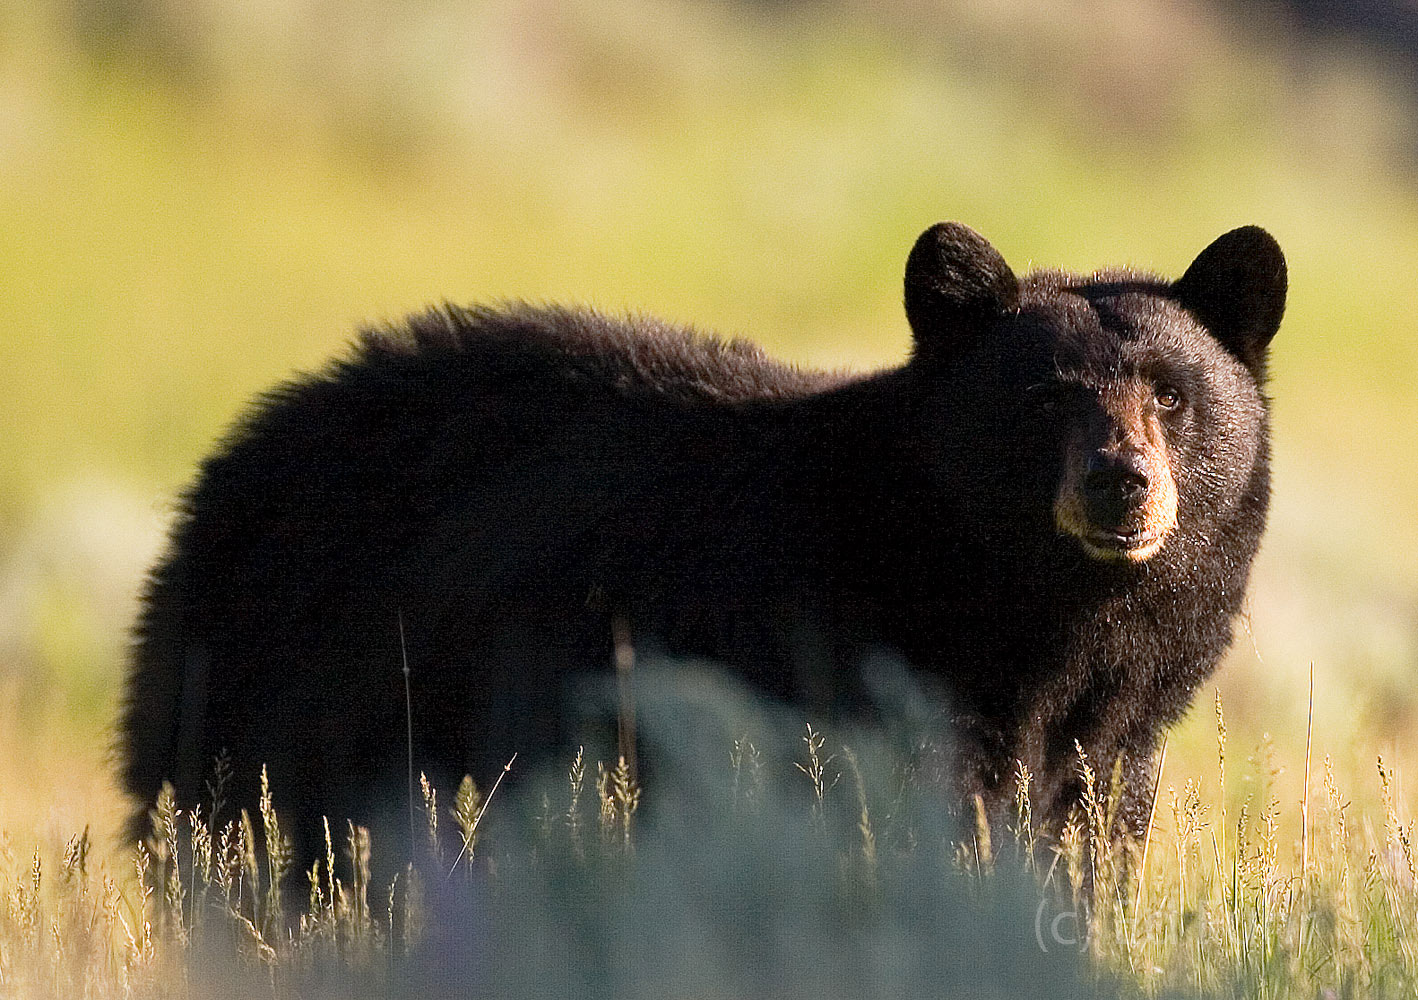 Early morning light slips over a nearby hill to illuminate this young black bear looking for food.